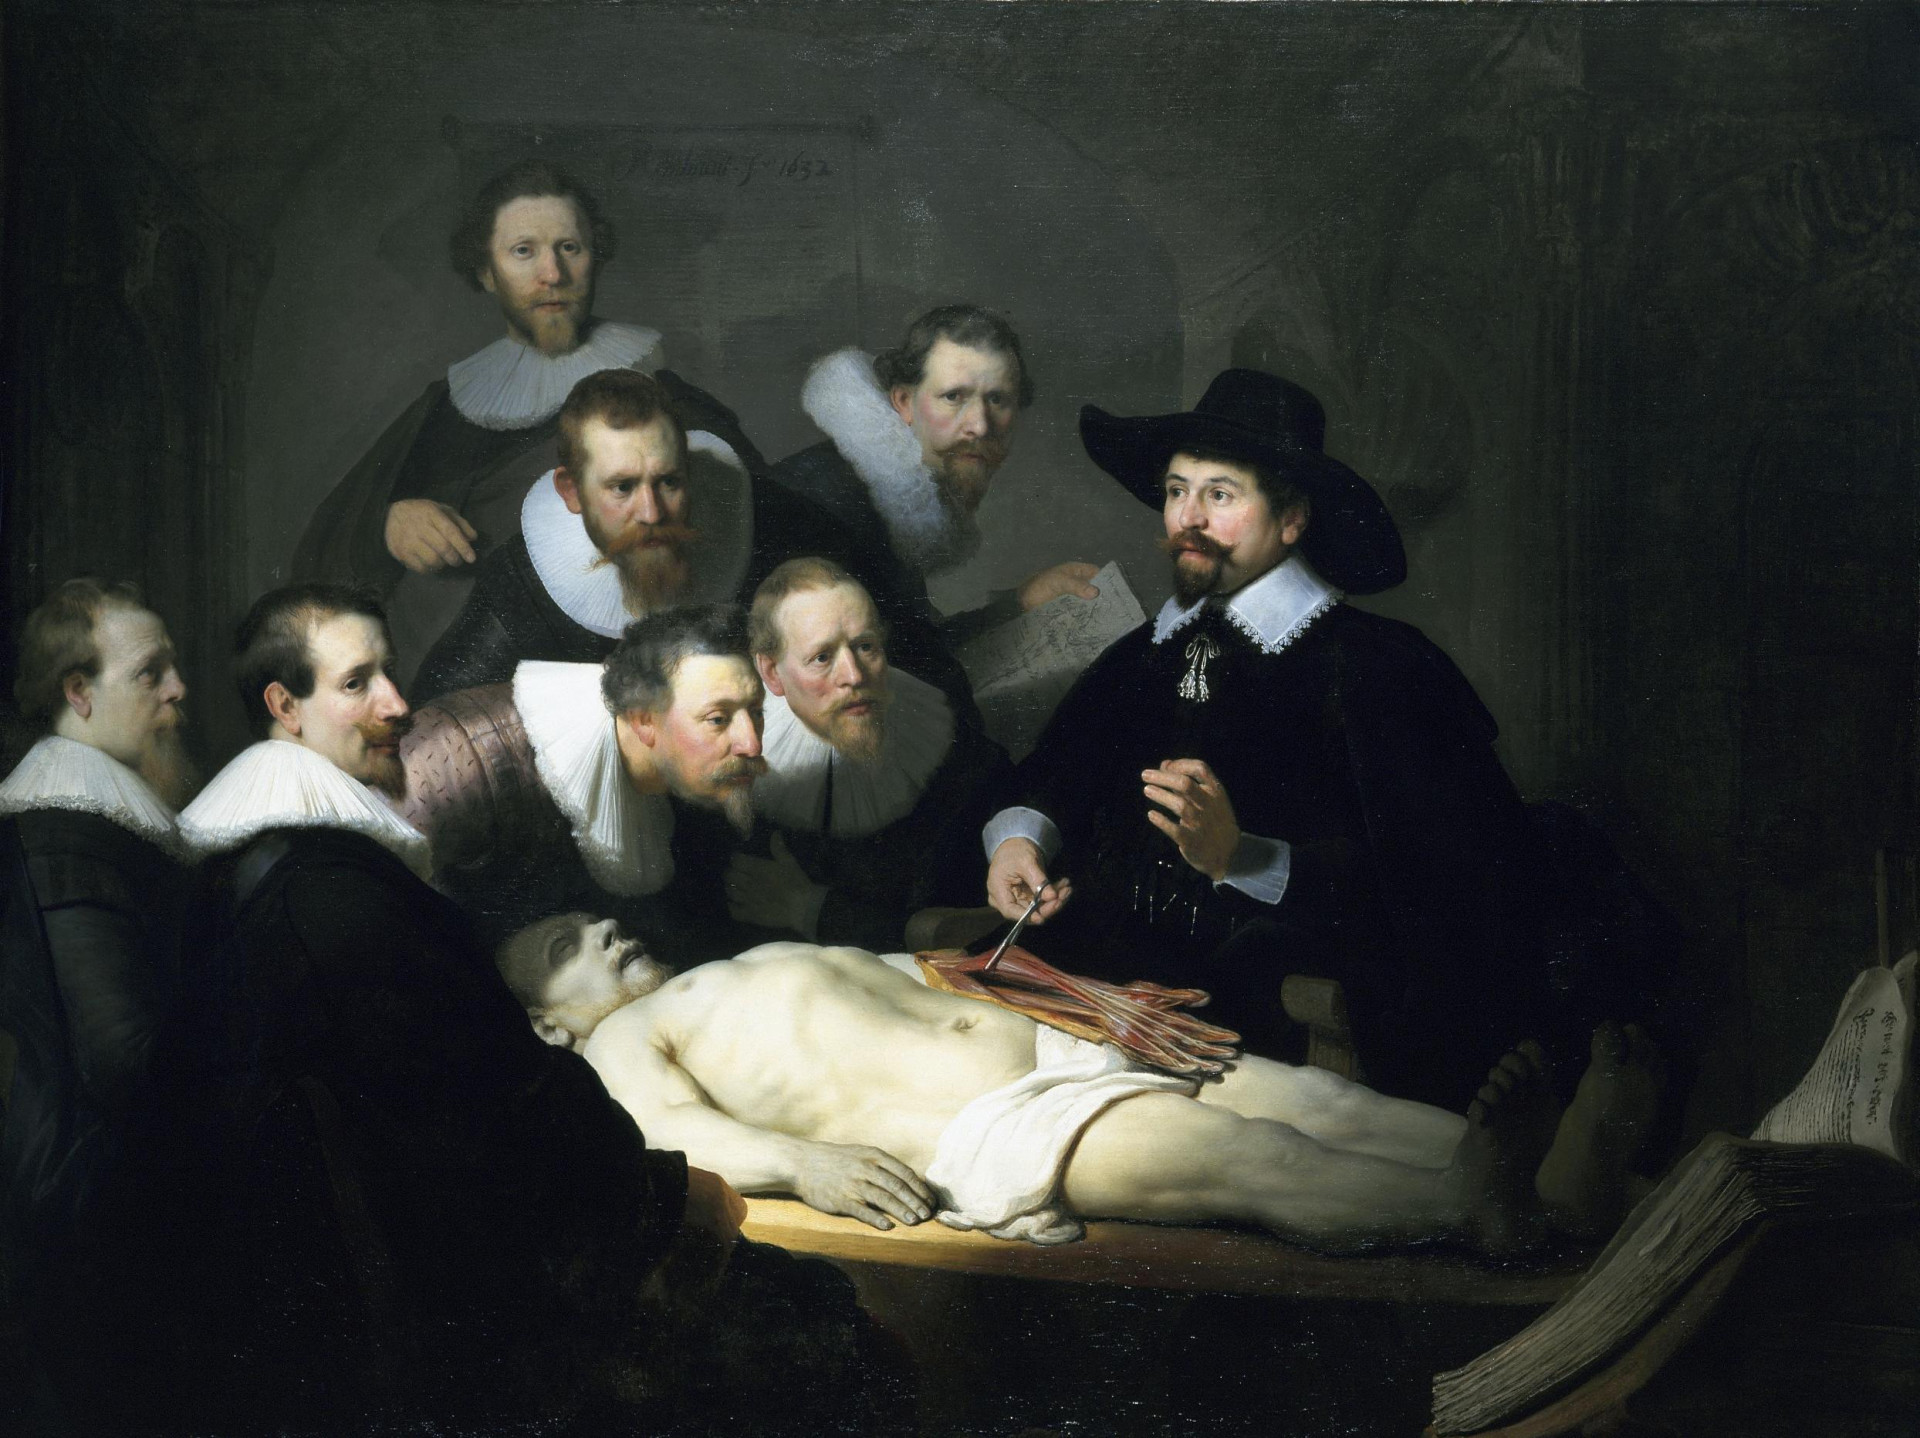 The Anatomy Lesson of Dr. Nicolaes Tulp by Rembrandt, 1632. Here, Tulp explains musculature matters. Elsewhere, the good doctor was promoting the health virtues of tea.